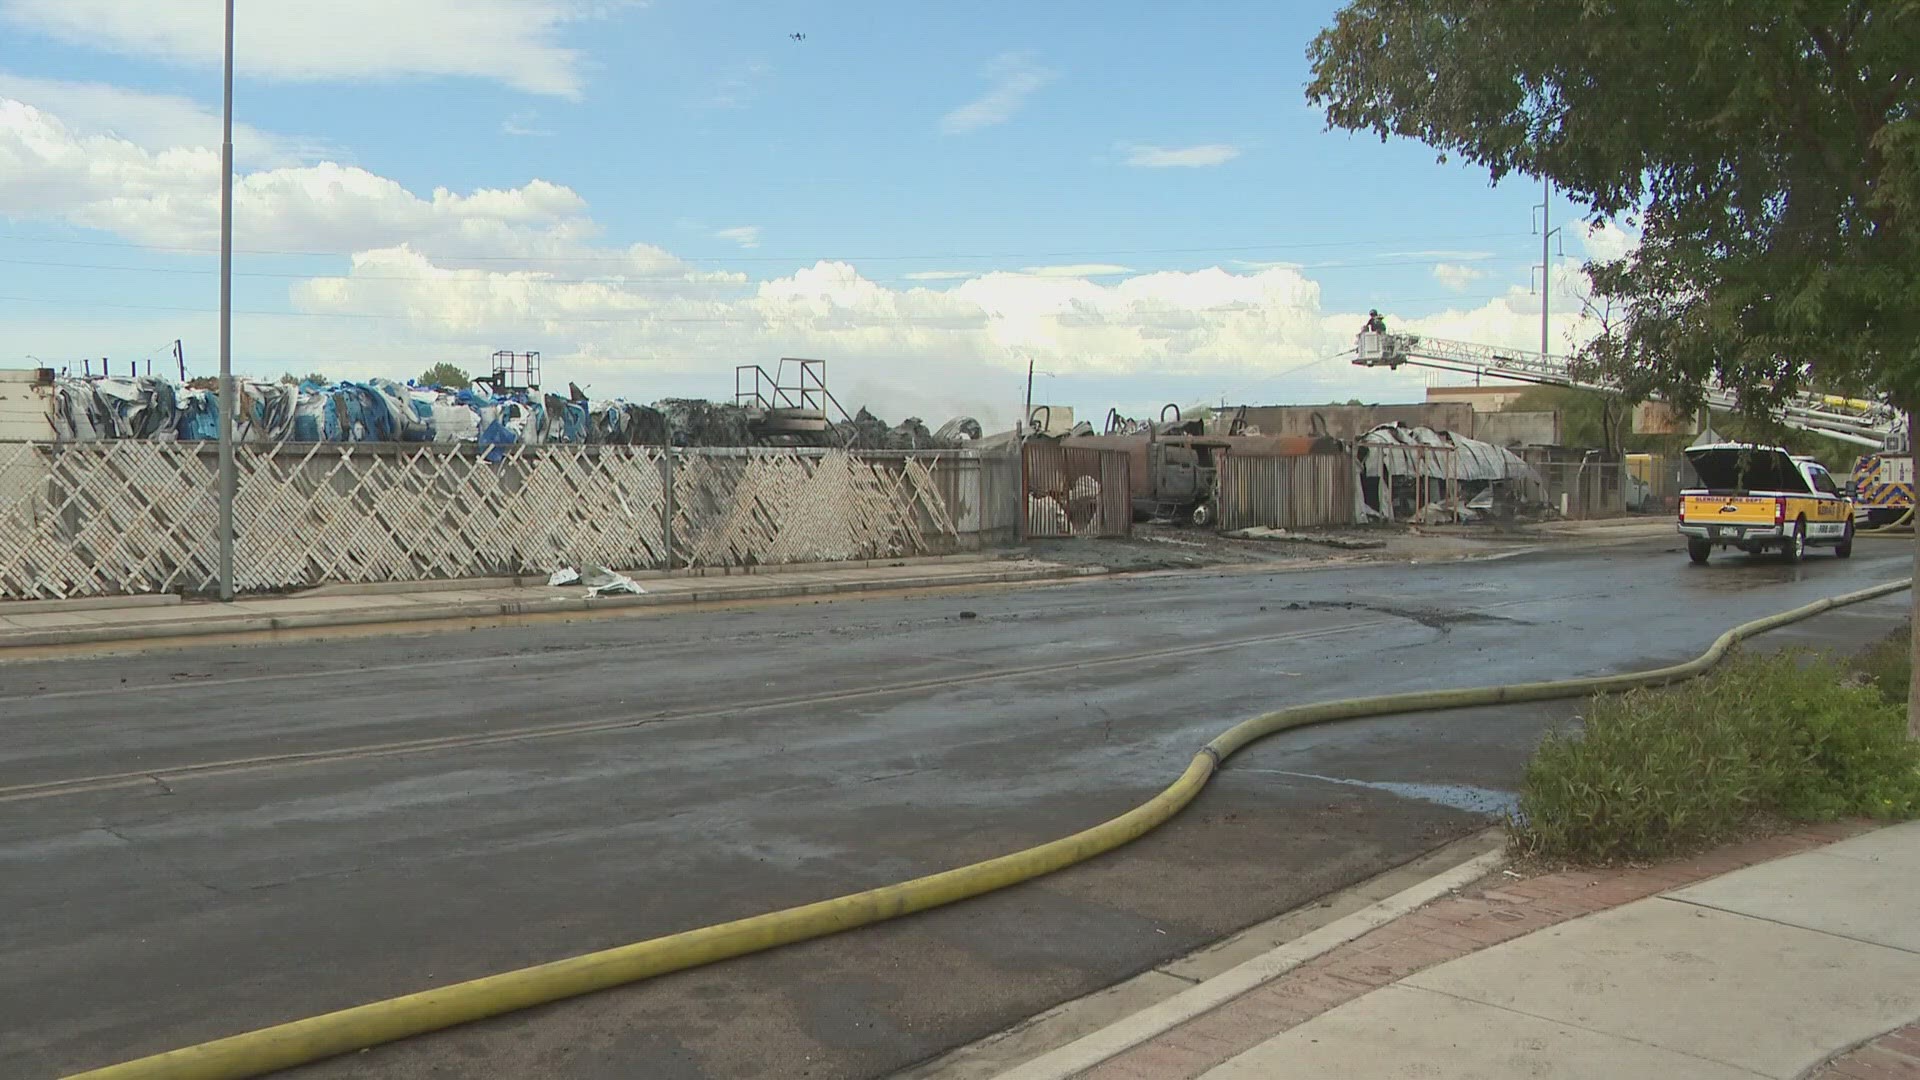 Fire officials say a tanker filled with vegetable oil exploded, sparking massive fire in Glendale.